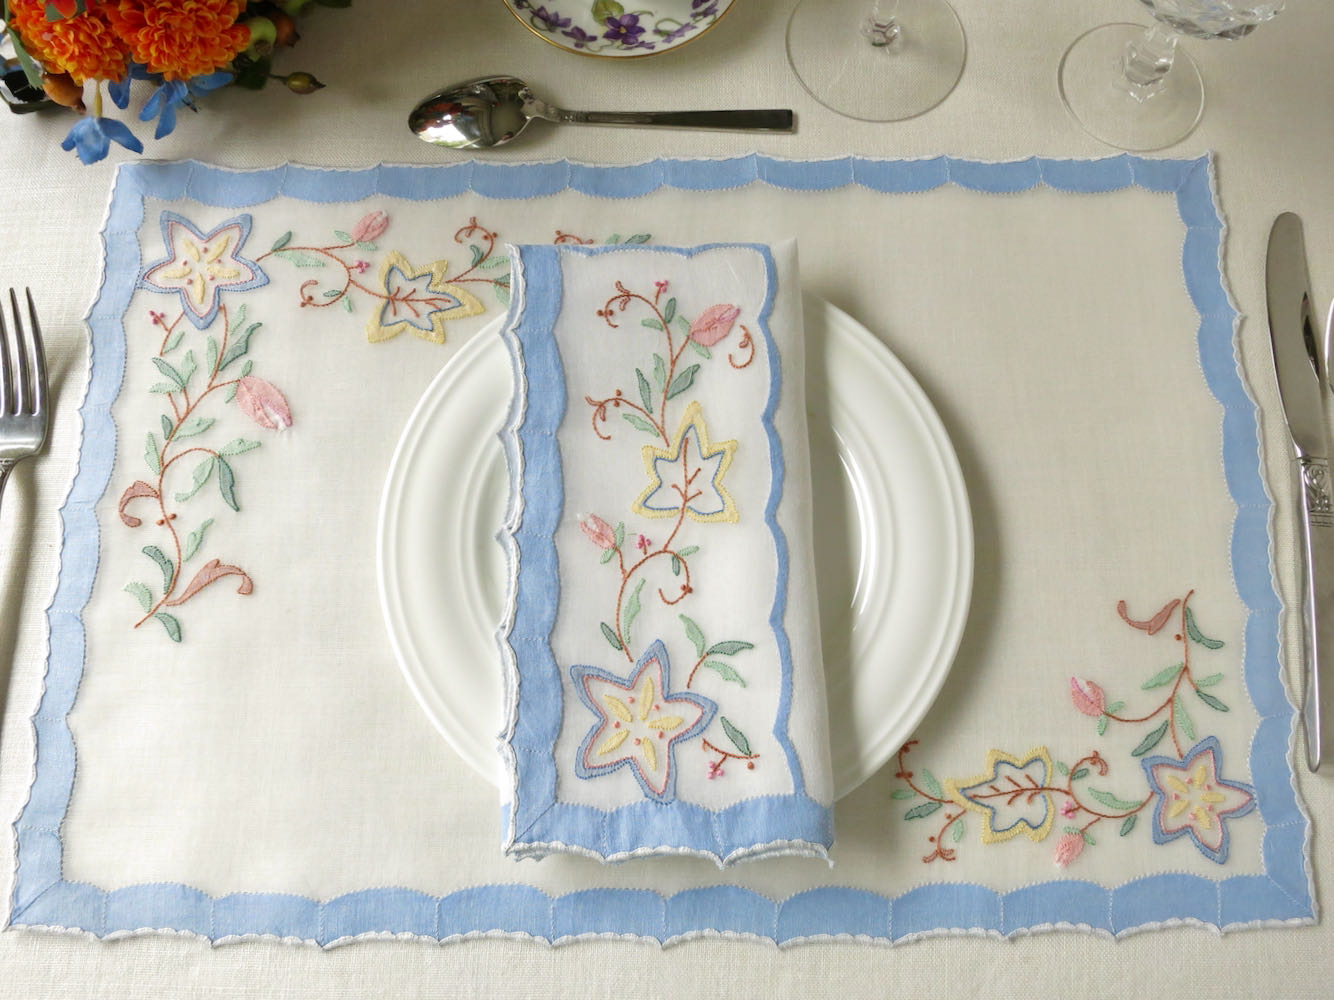 Vibrant Vintage Madeira Embroidery 17pc Placemat Set for 8